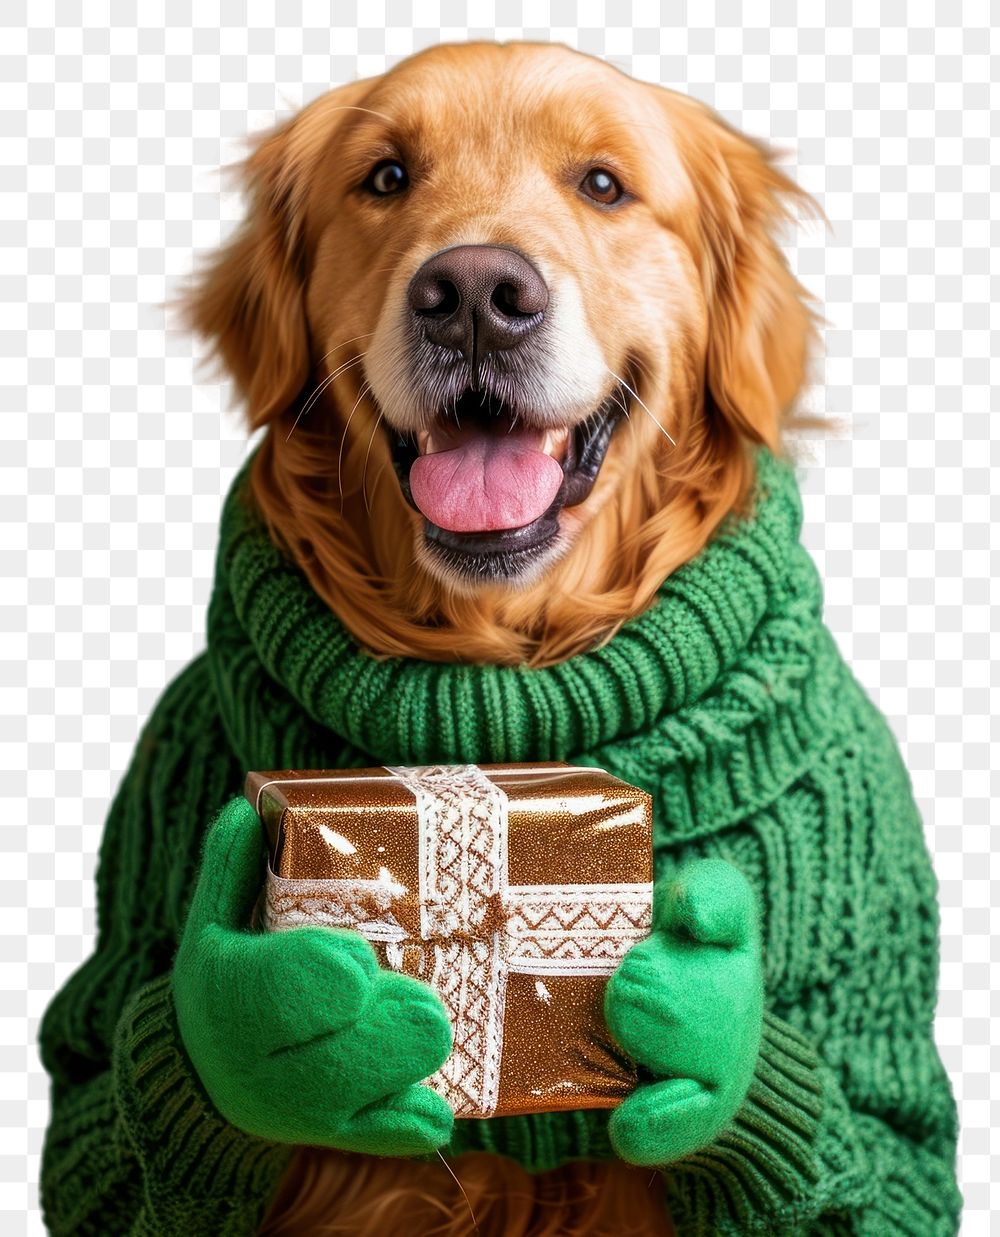 PNG  Golden retriever wearing green sweater and gloves portrait holding mammal.